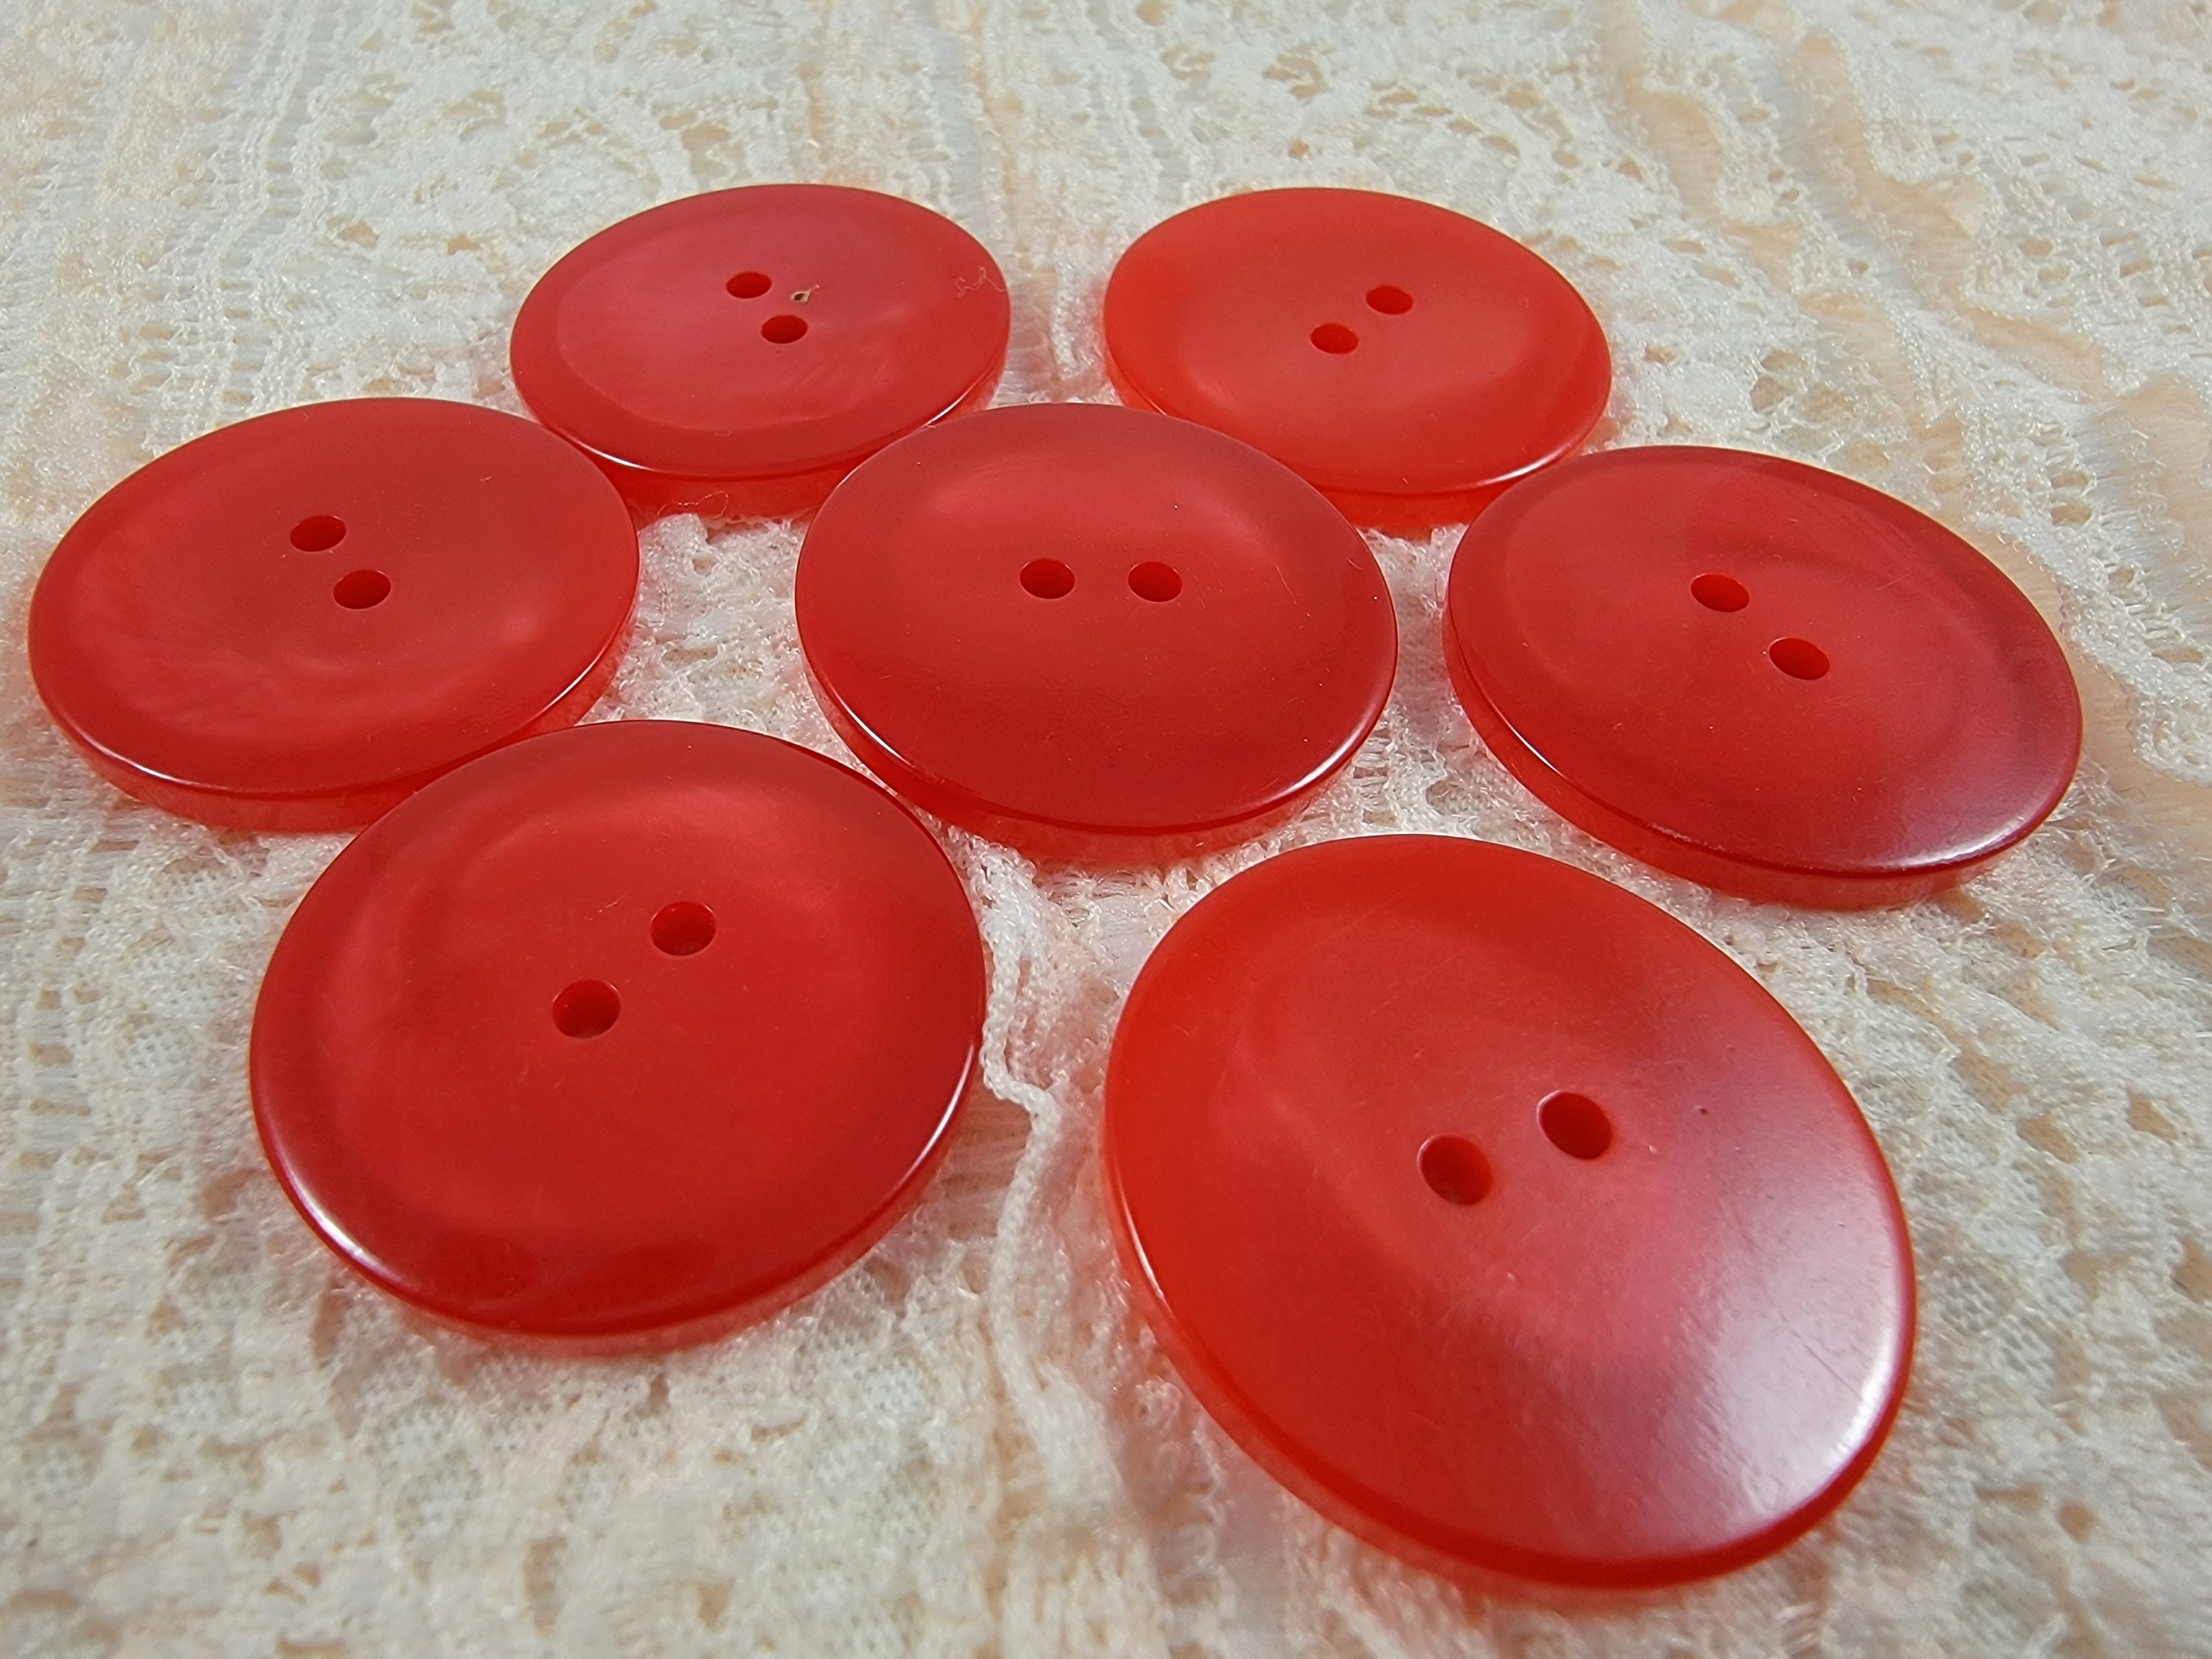 Red small buttons stock image. Image of detail, design - 24861047